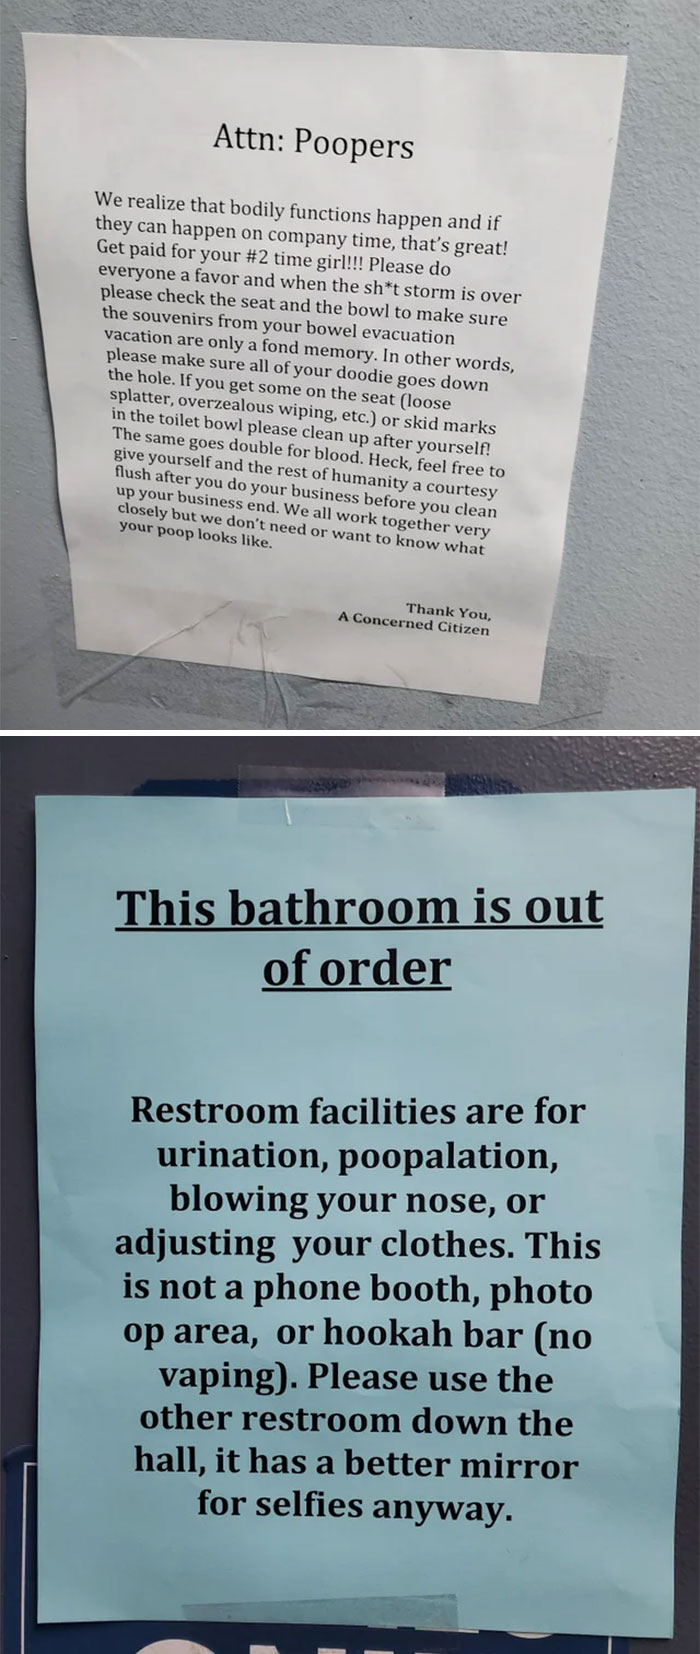 These Were Put Up In The Women's Employee Restroom In A Print Shop. Thoughts?